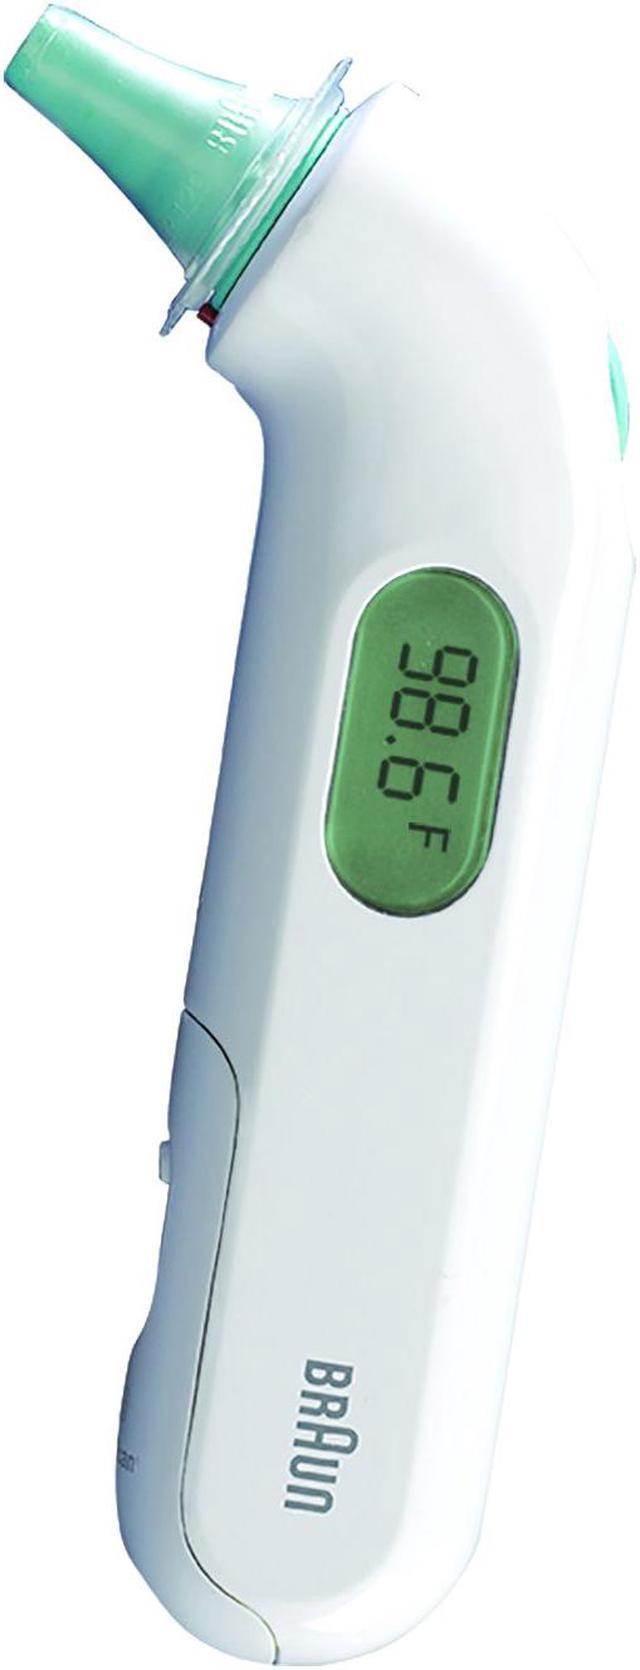 Review: The Braun ThermoScan 3 Compact Ear Thermometer